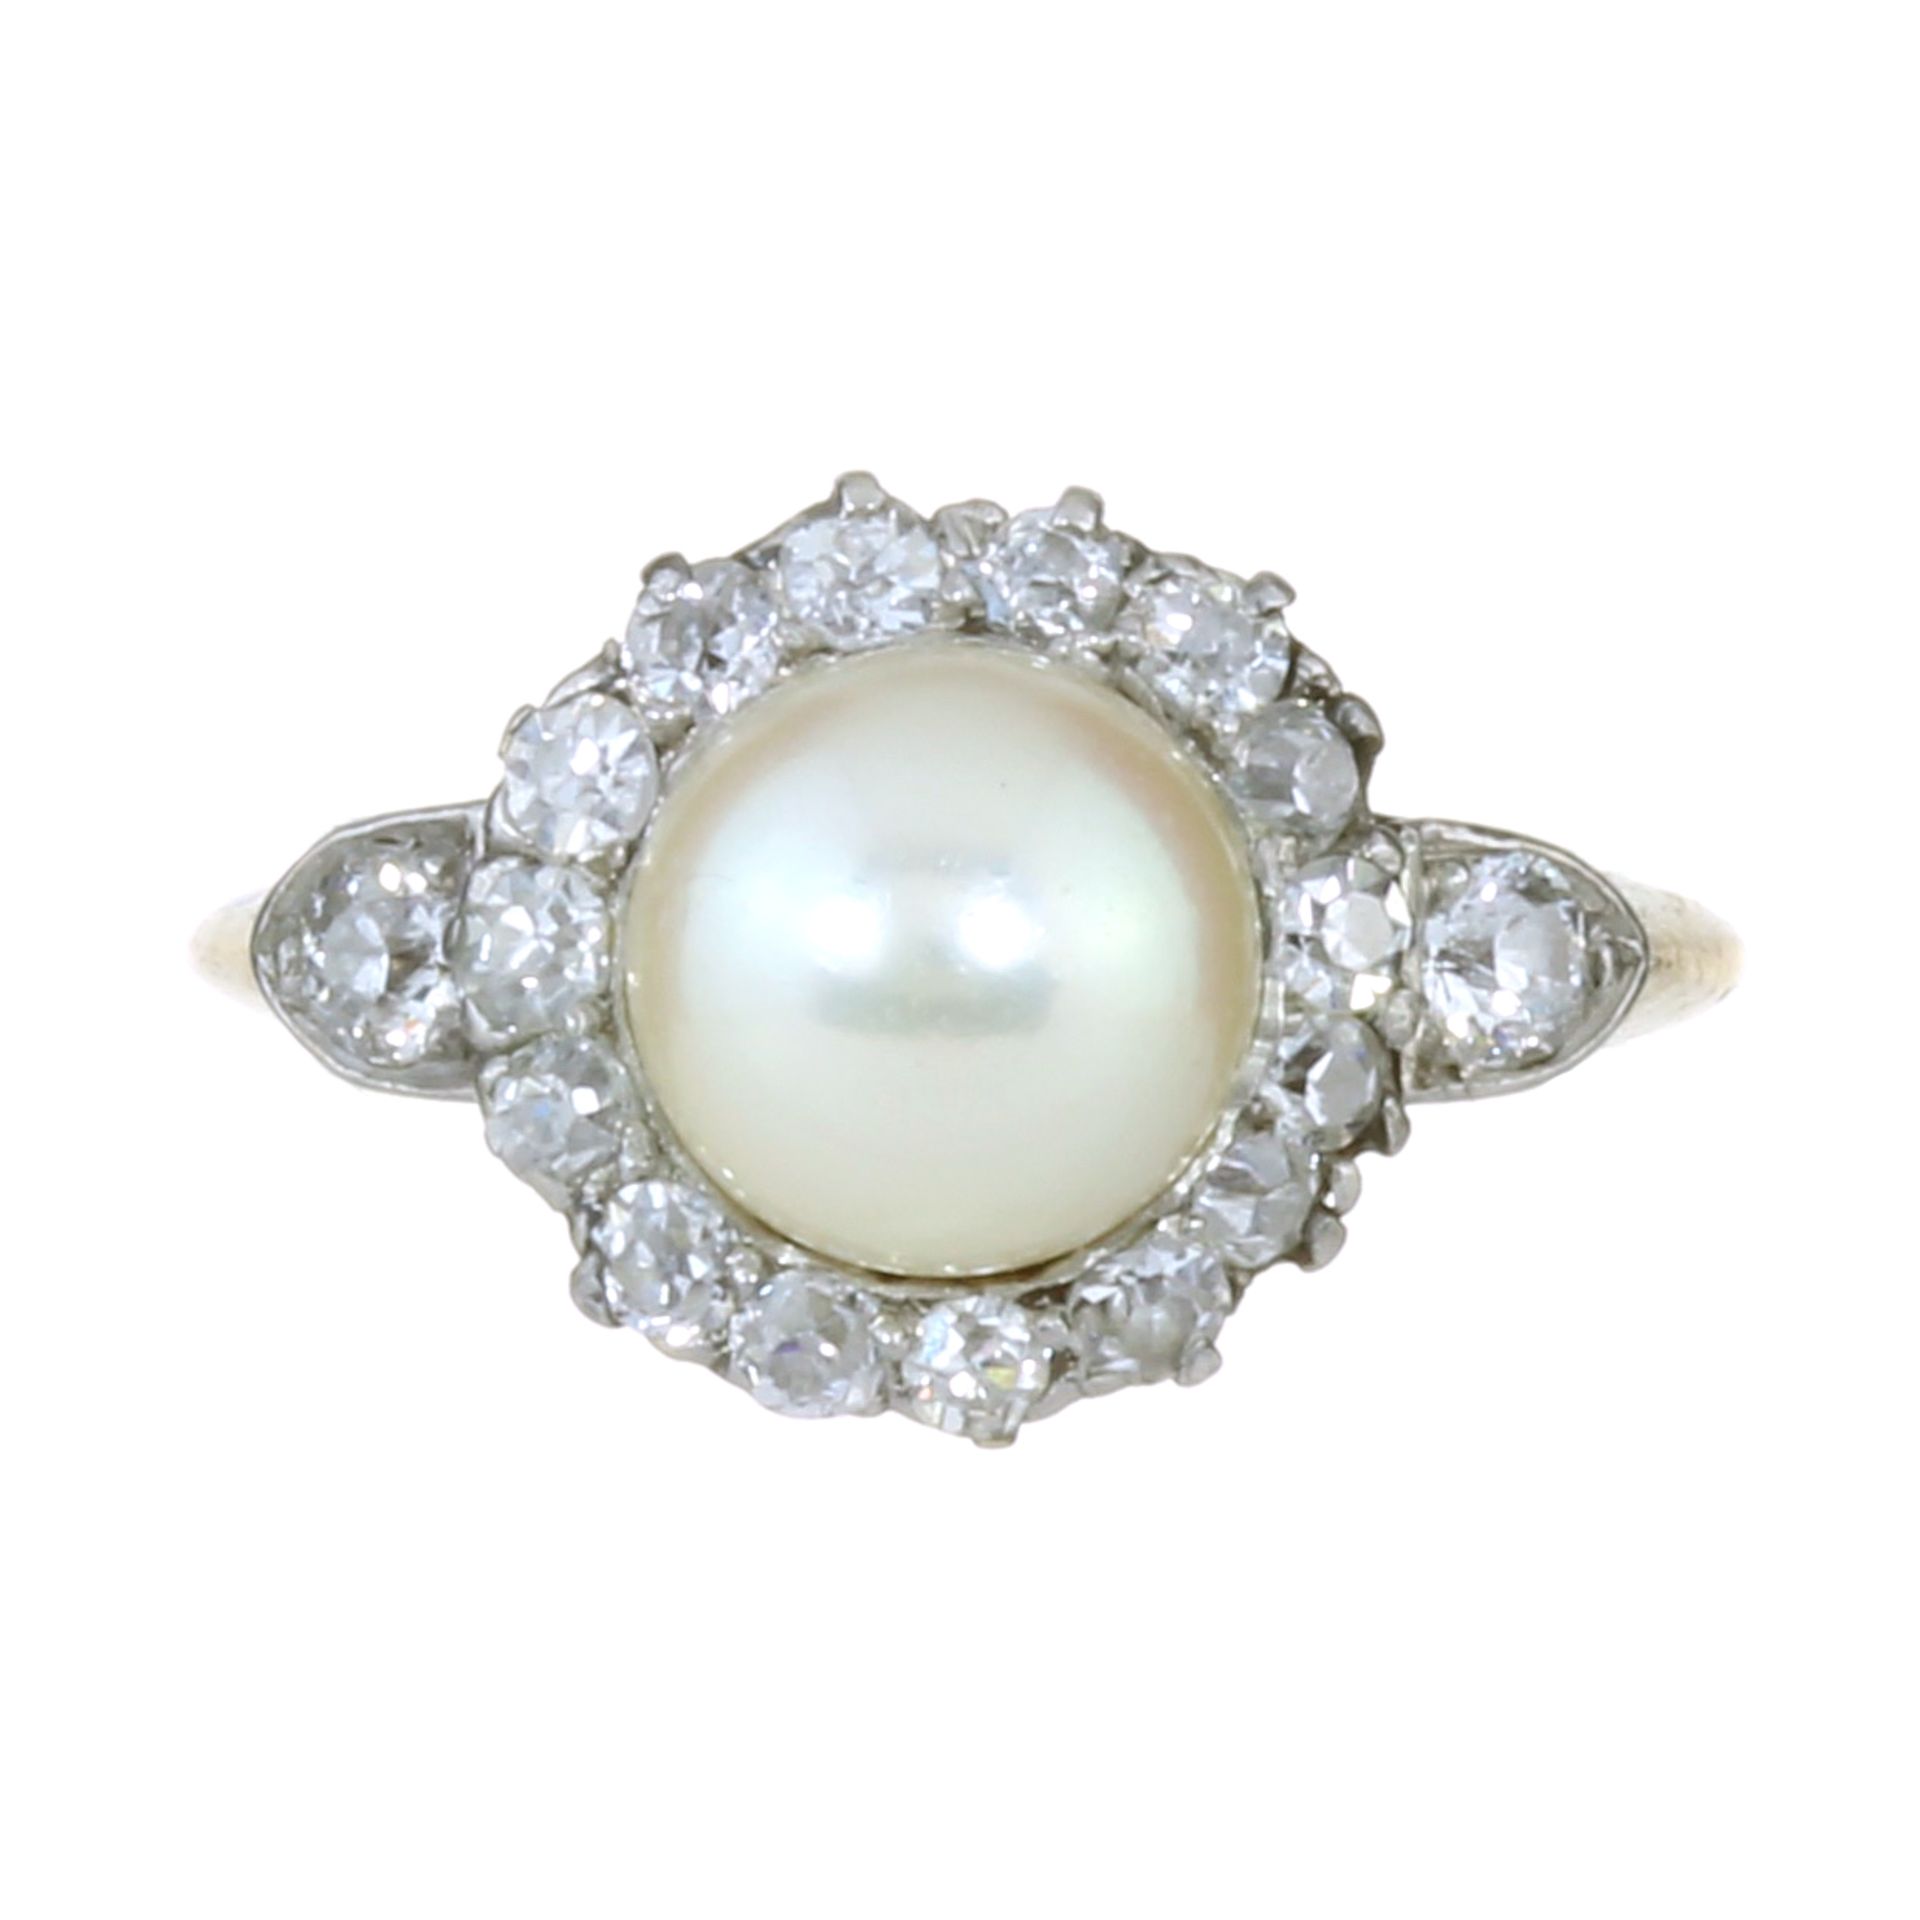 AN ANTIQUE PEARL AND DIAMOND CLUSTER RING in yellow gold set with a central pearl of 7.25mm